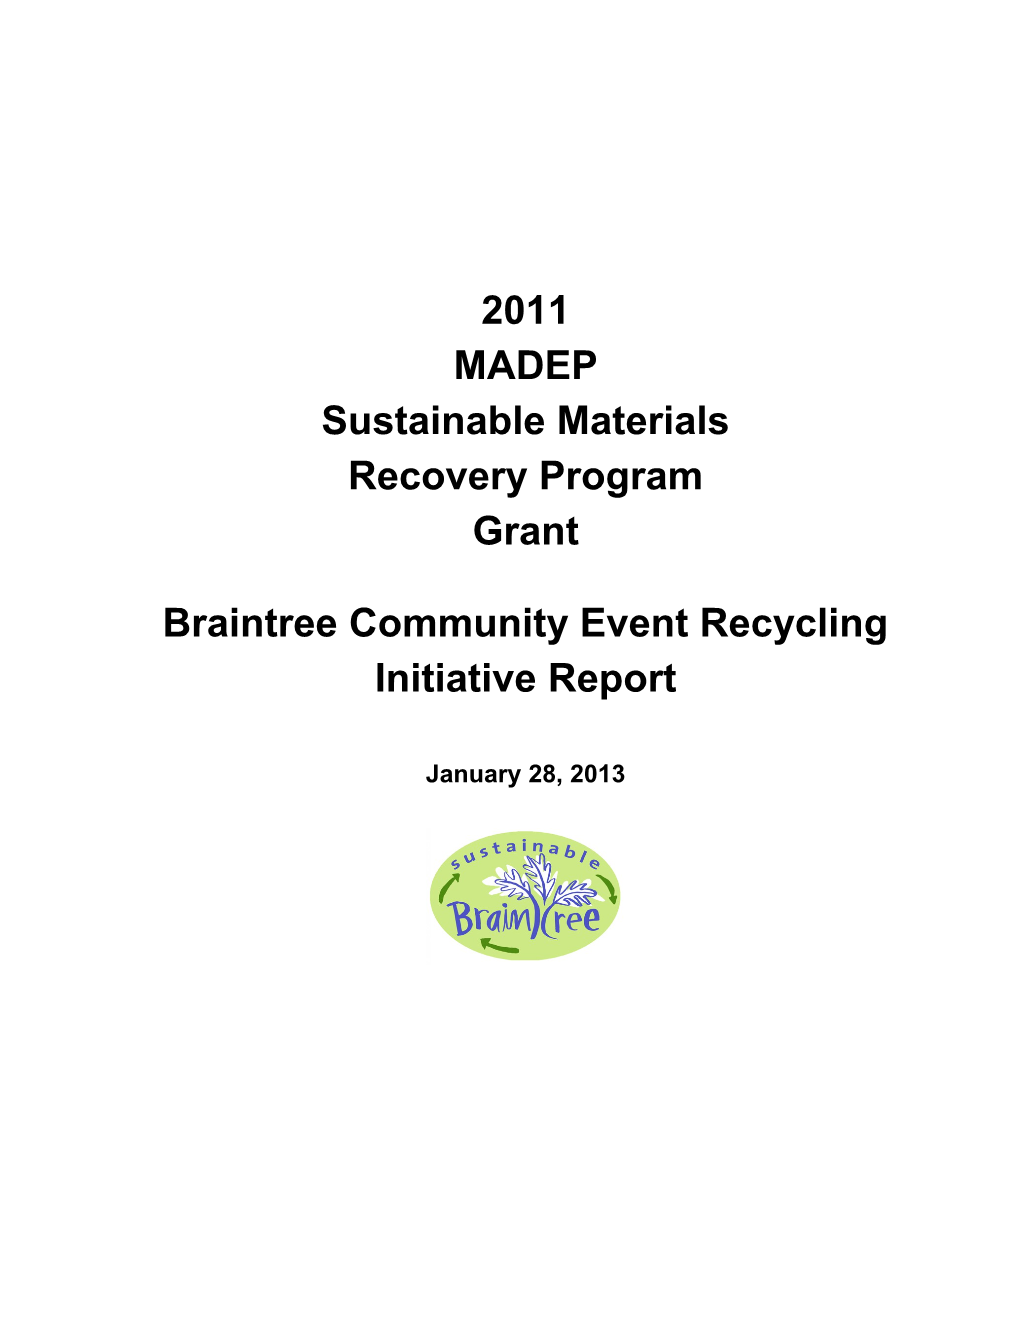 Braintree Community Event Recycling Initiative Report